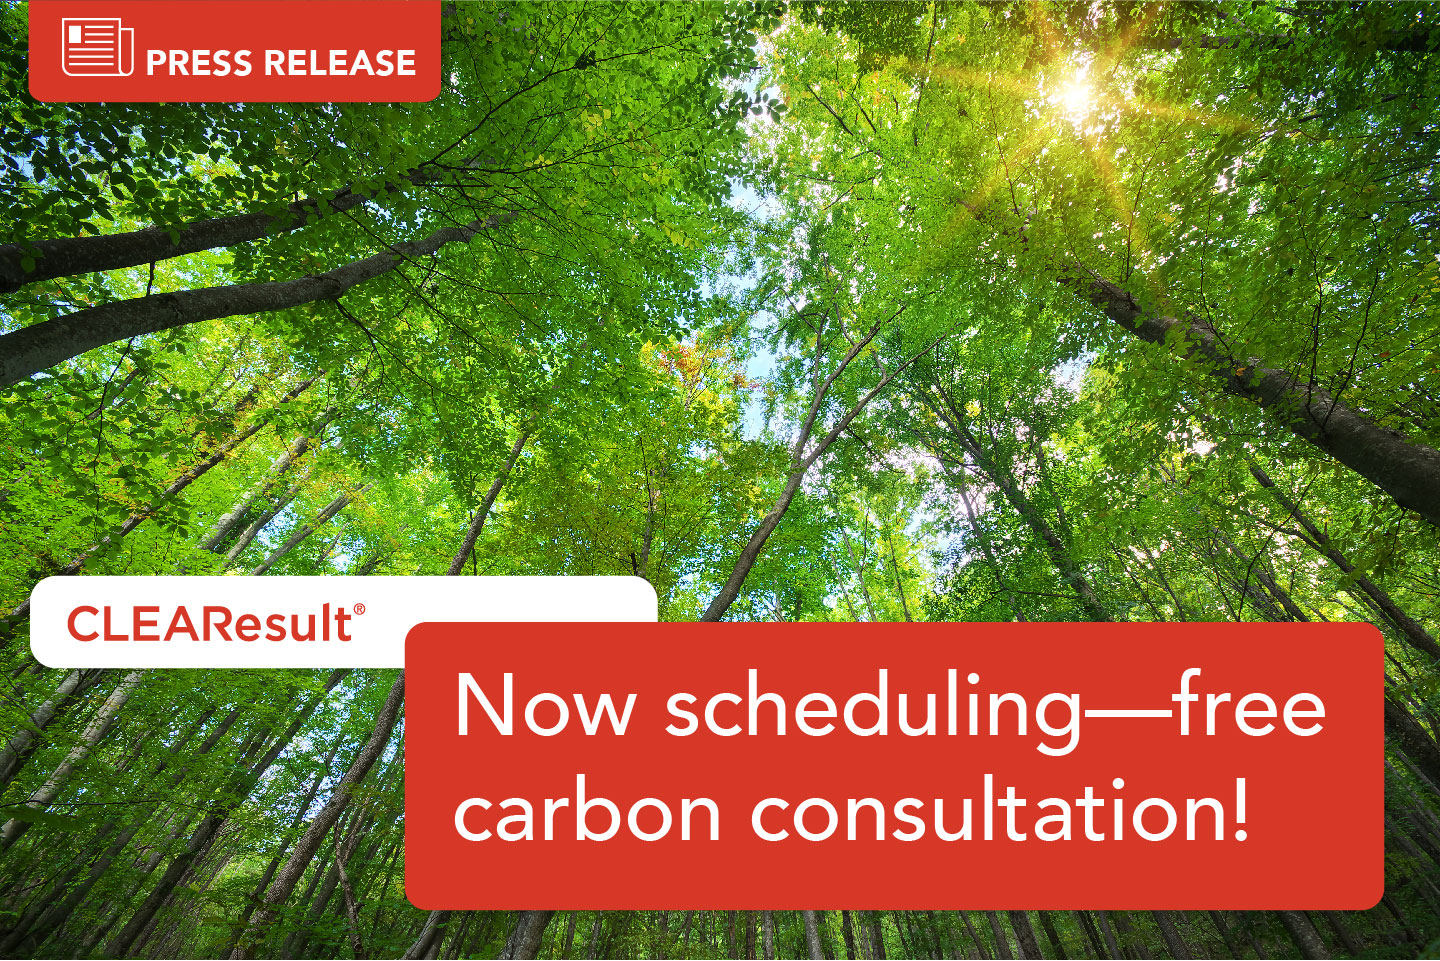 Press Release: CLEAResult Now scheduling – free carbon consultation!